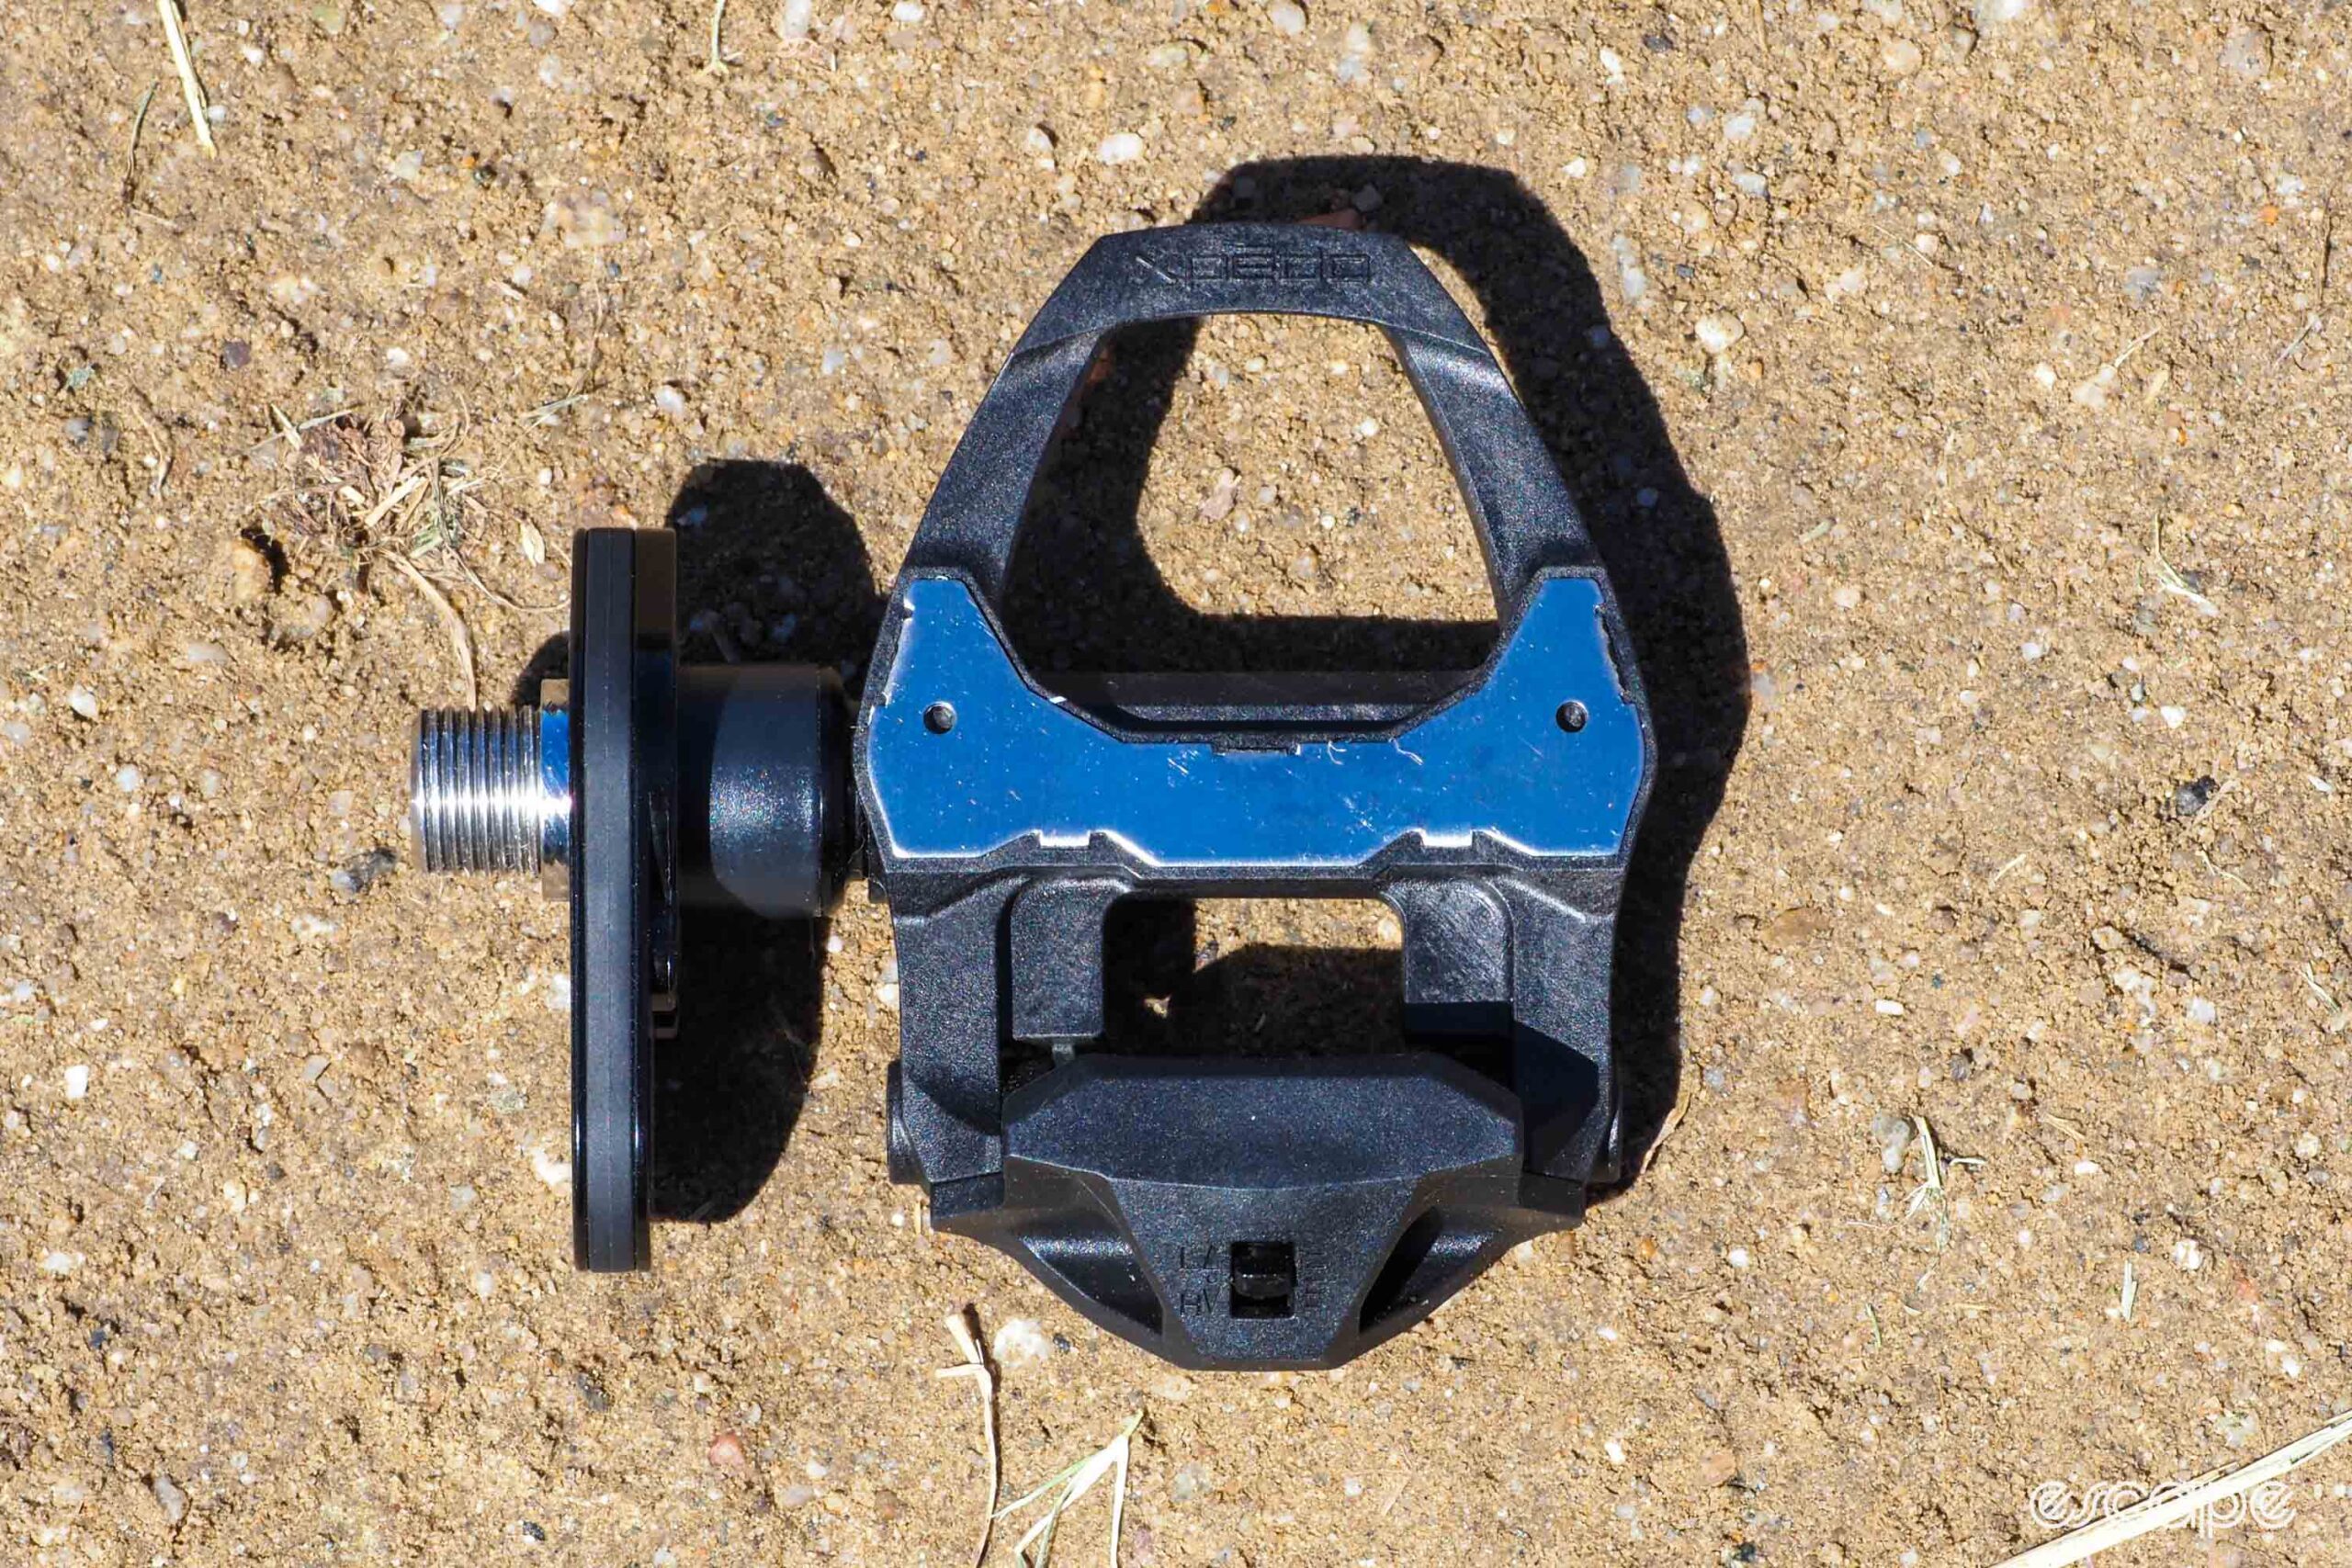 Xpedo Omni power meter pedals